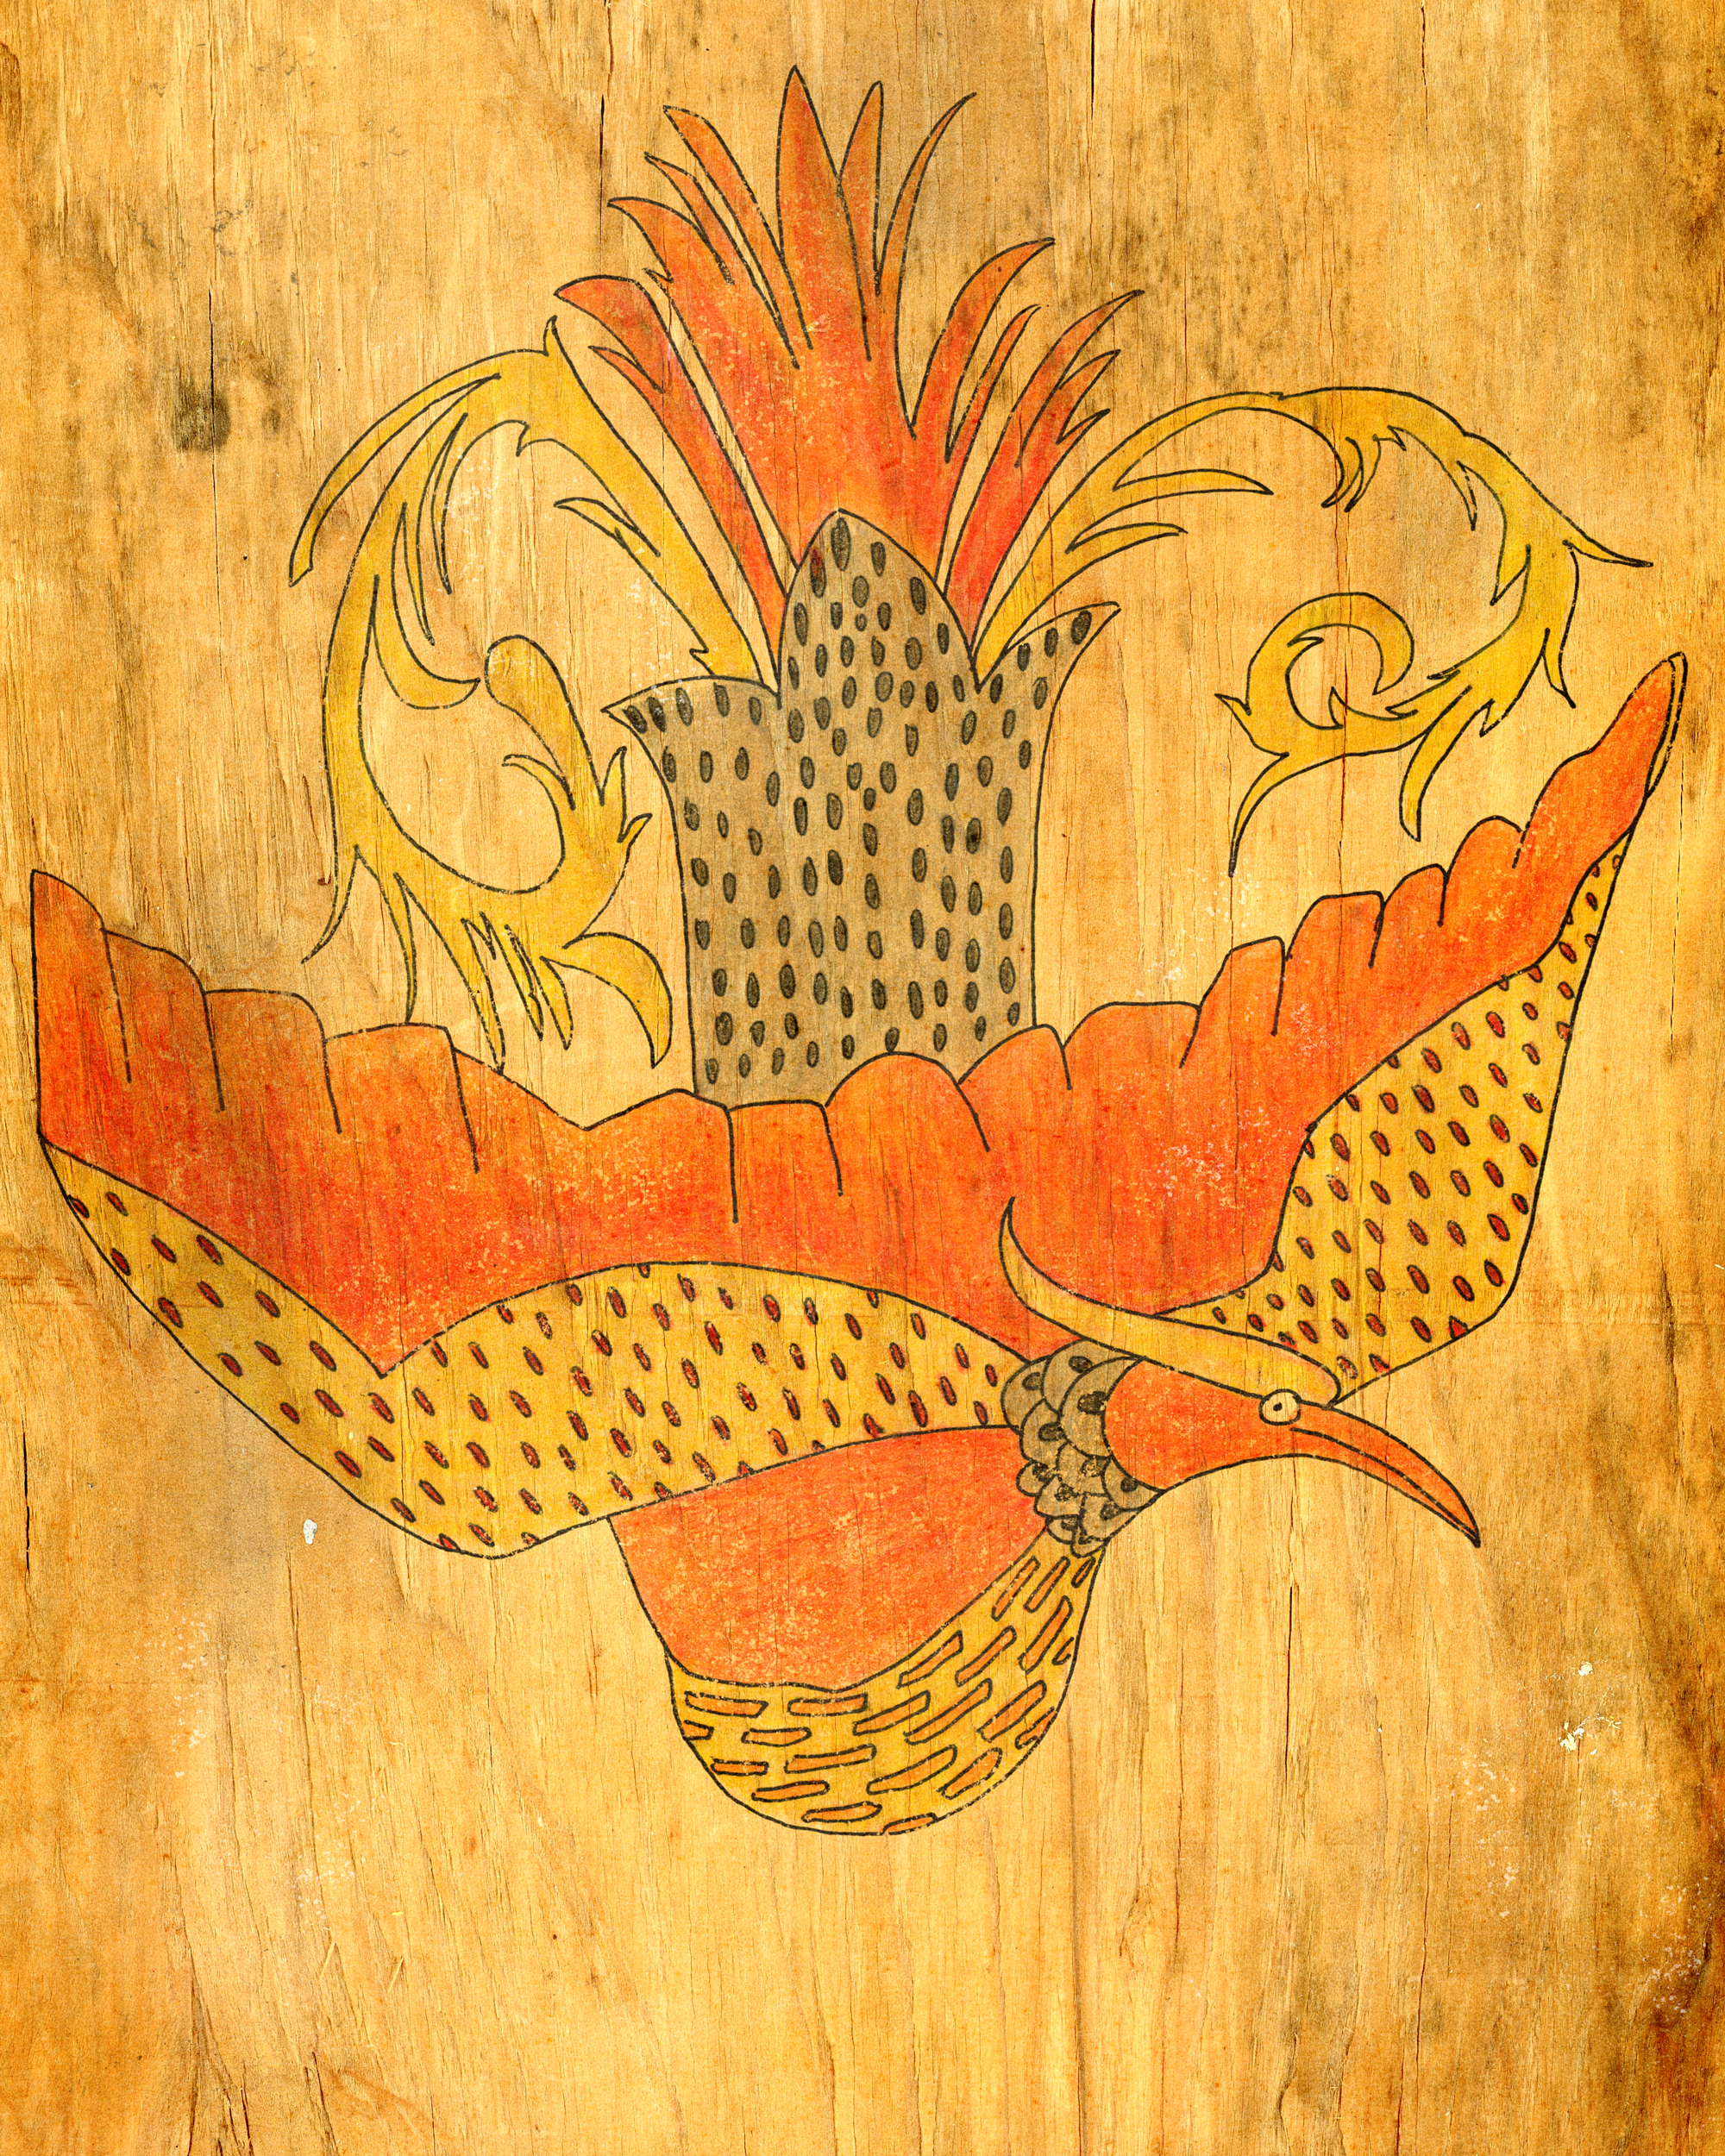 A phoenix of Art Deco design appears to emerge from a plank of wood.